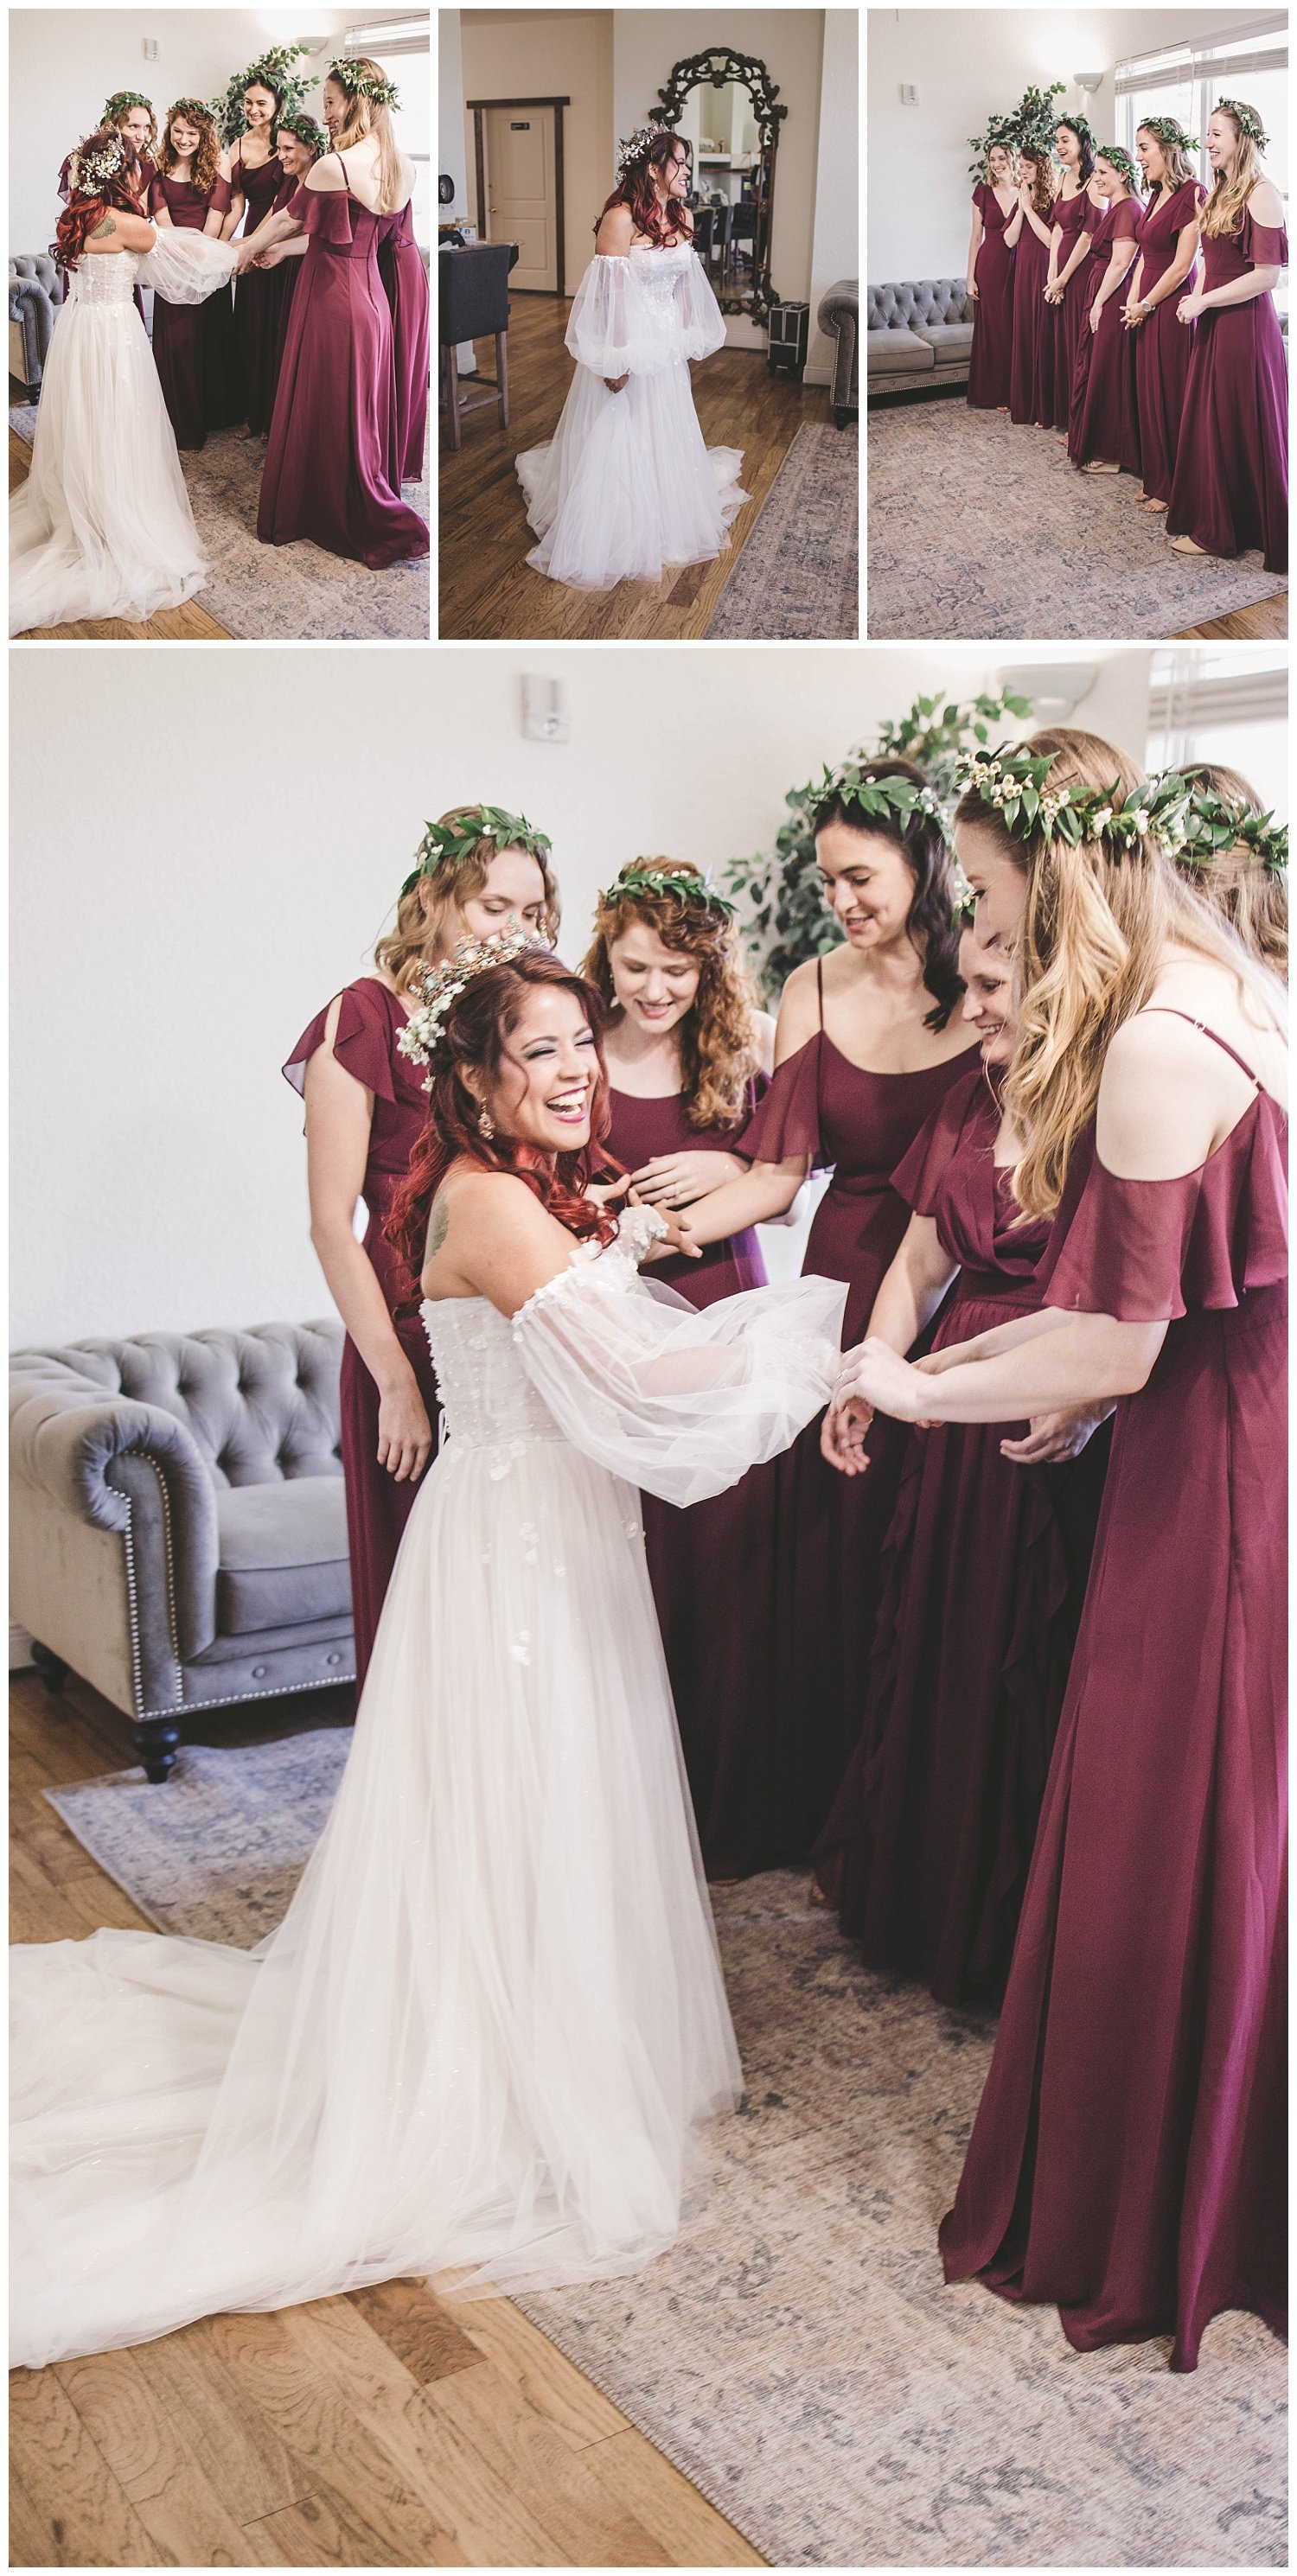  Christopher and Melanie's renaissance-themed wedding at The Sterling Venue was a delightful adventure that blended love, laughter, and a touch of whimsy. 